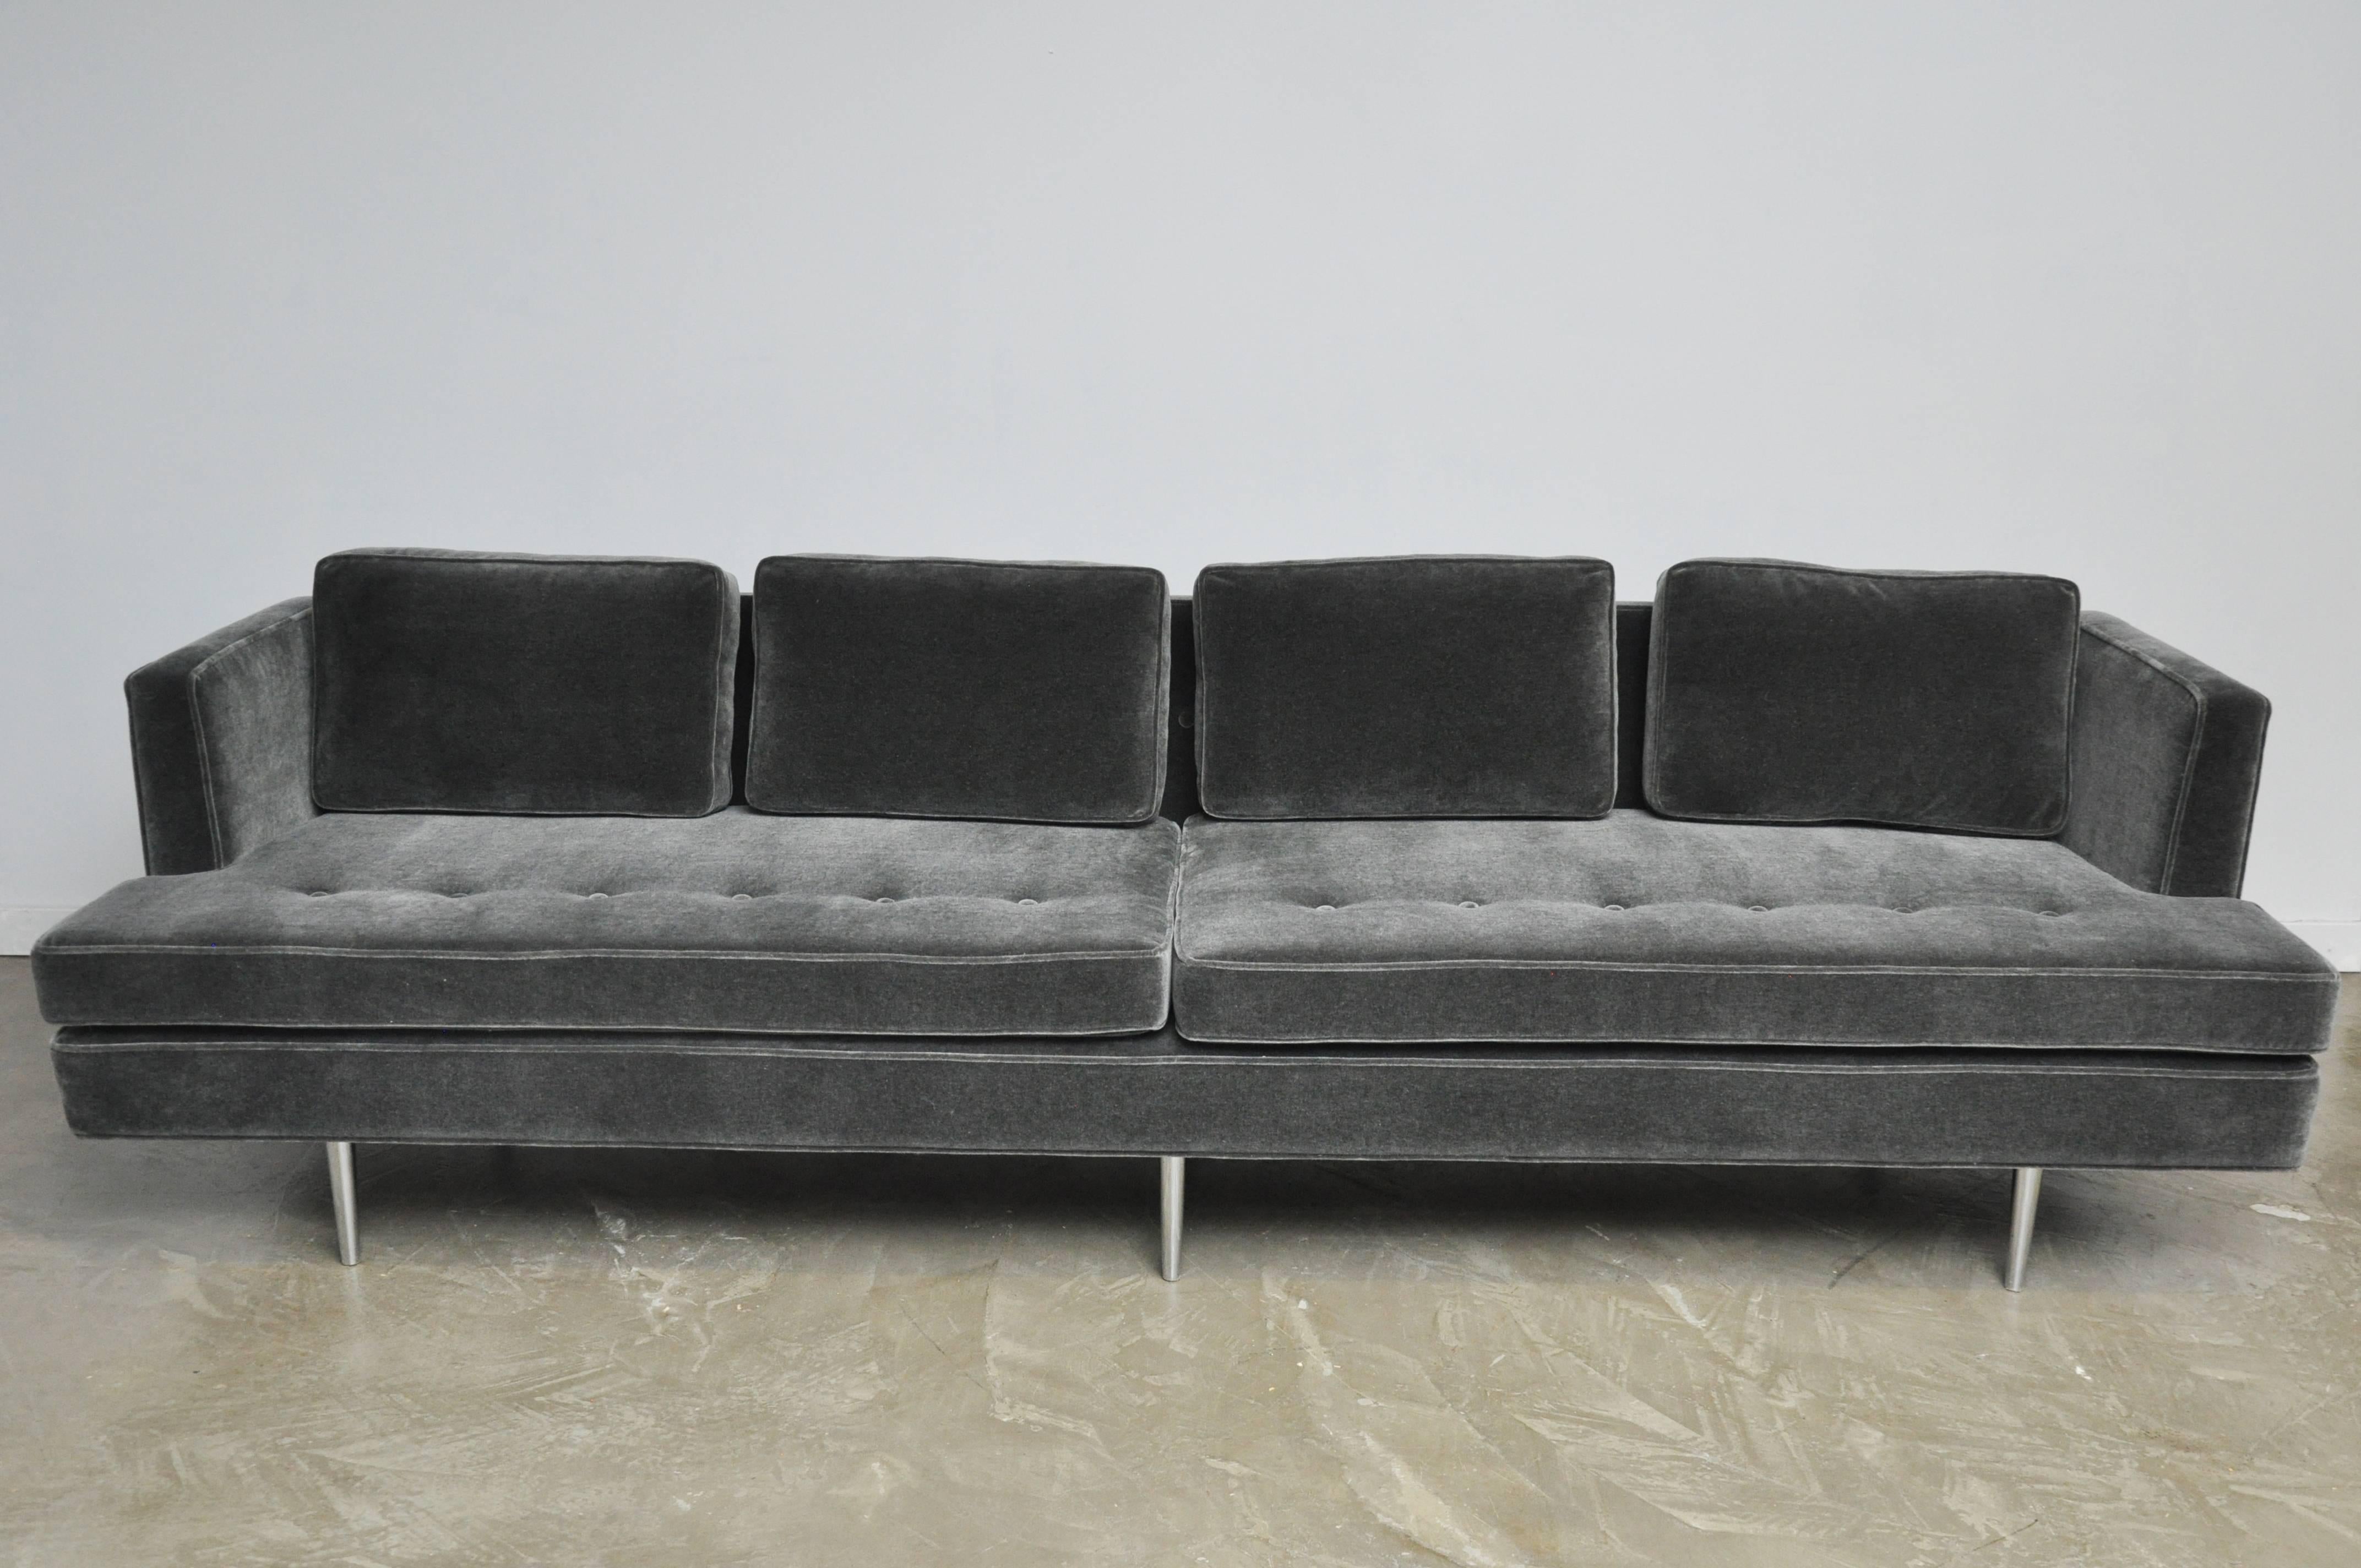 Classic Dunbar sofa designed by Edward Wormley, circa 1950. Fully restored, newly upholstered in charcoal mohair over original nickel legs.

